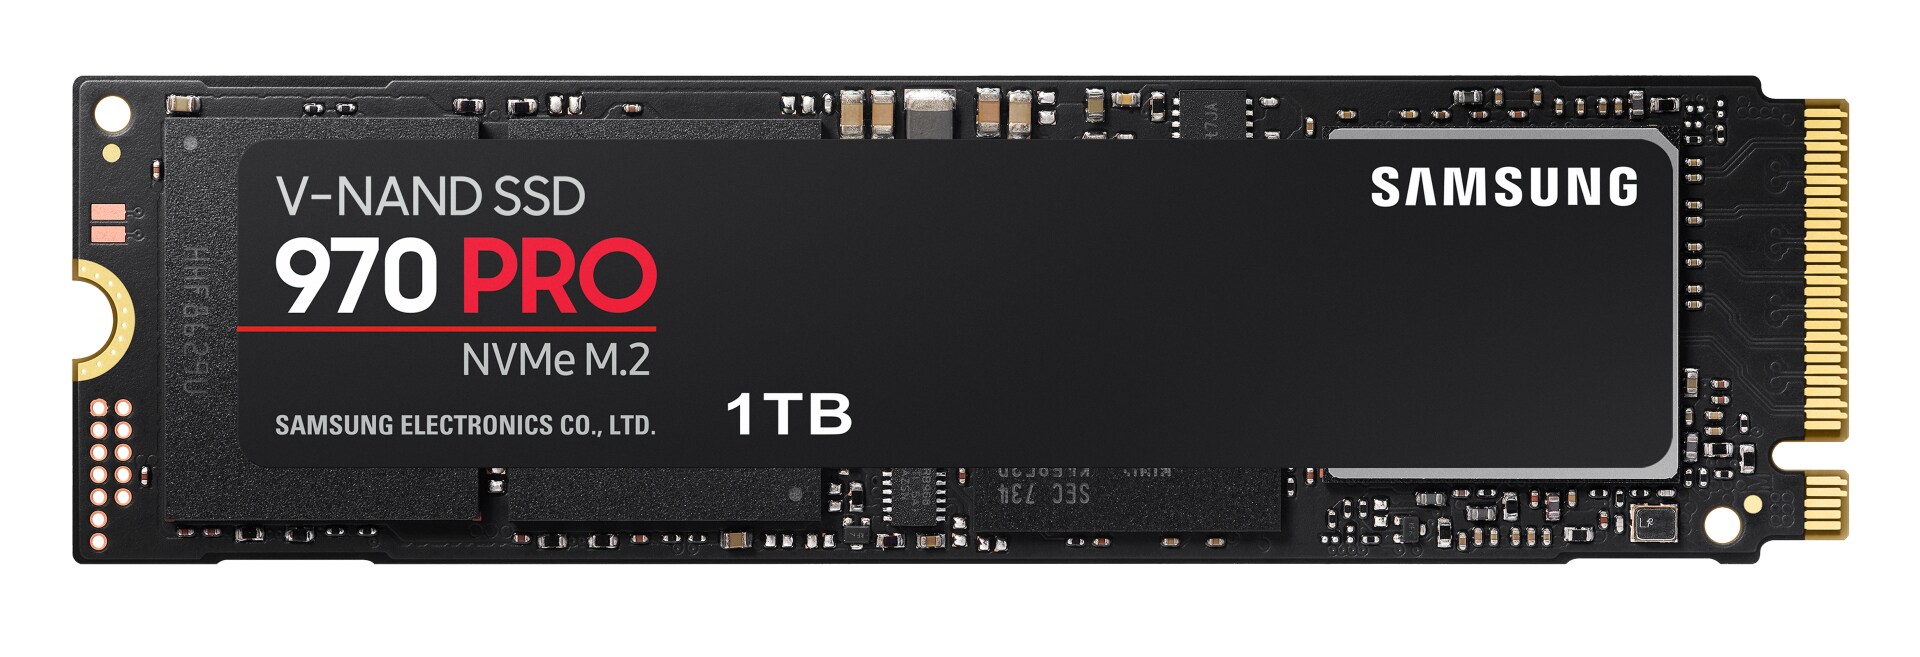 Samsung 970 Pro 1TB NVMe M.2 PCIe Solid State Drive